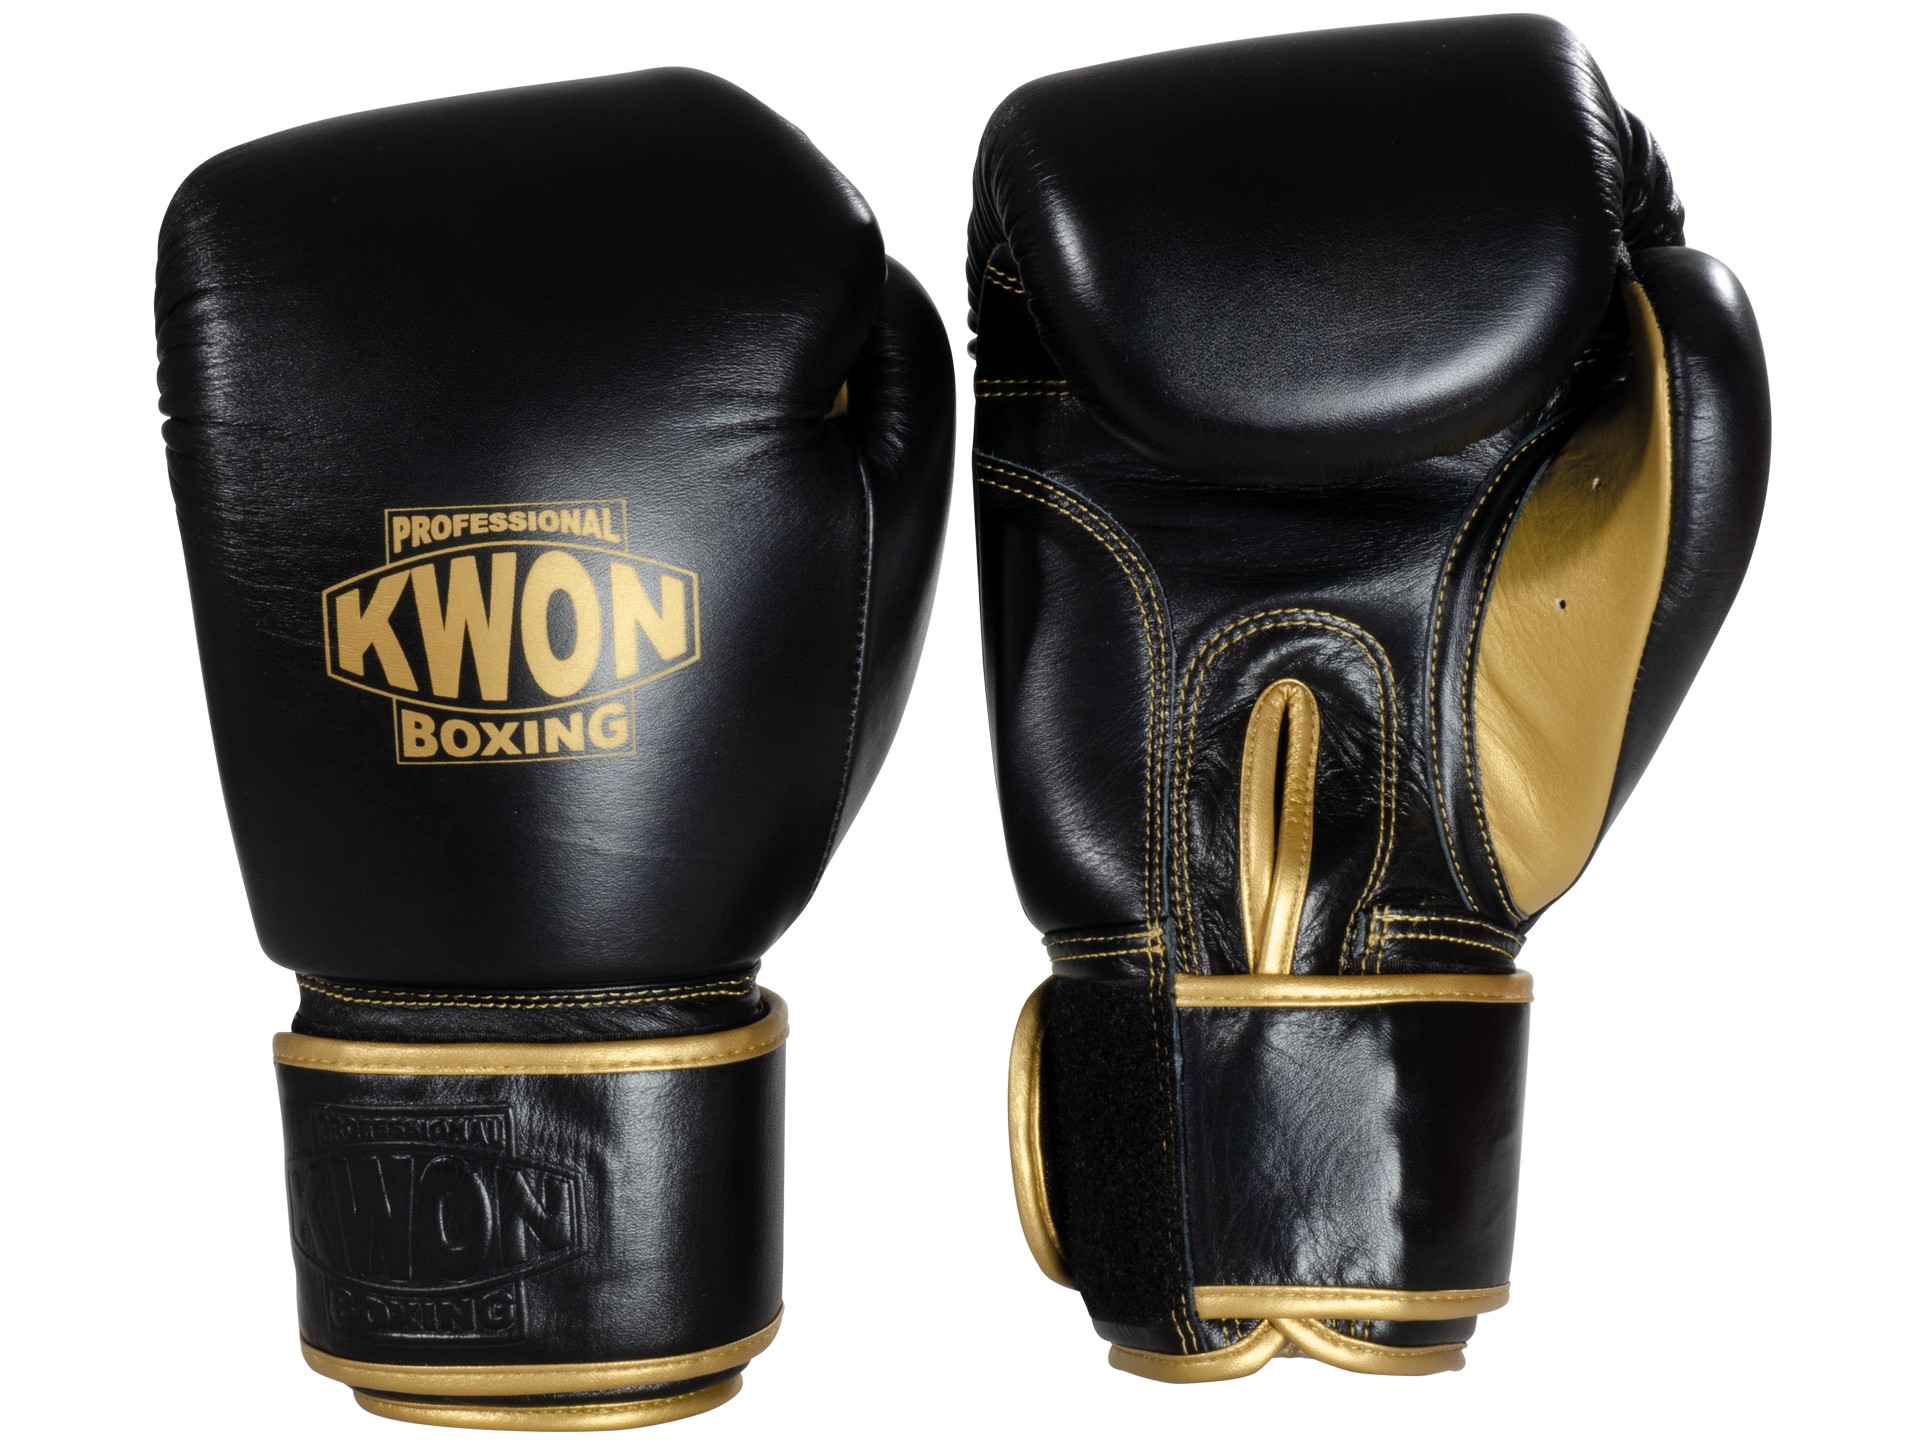 KWON PROFESSIONAL BOXING Gloves Leather with Thai Defensive Sparring boxes for Velcro | kickboxing